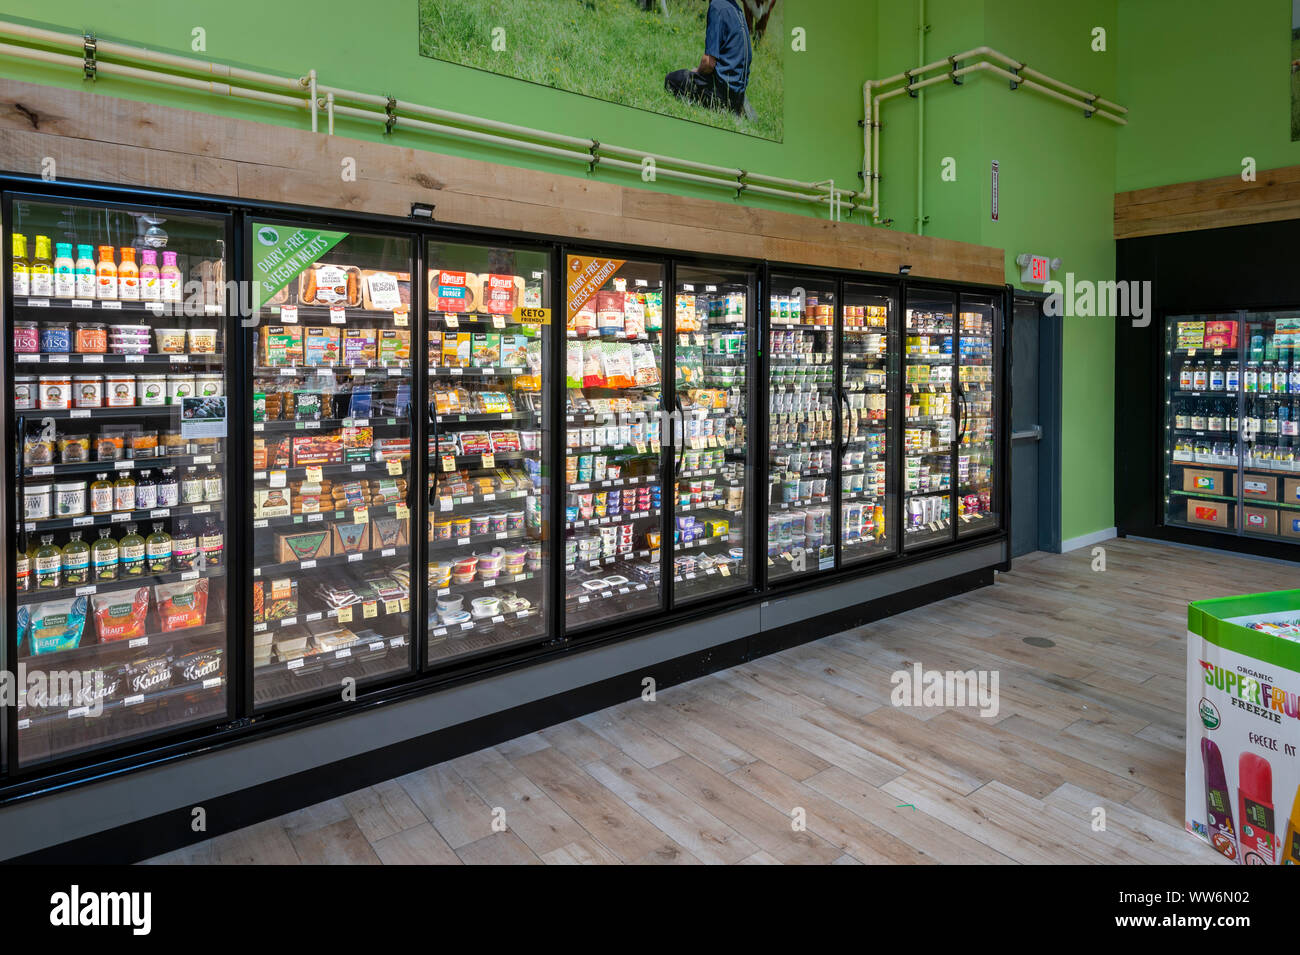 Refrigerated Section Of American Food Store Stock Photo